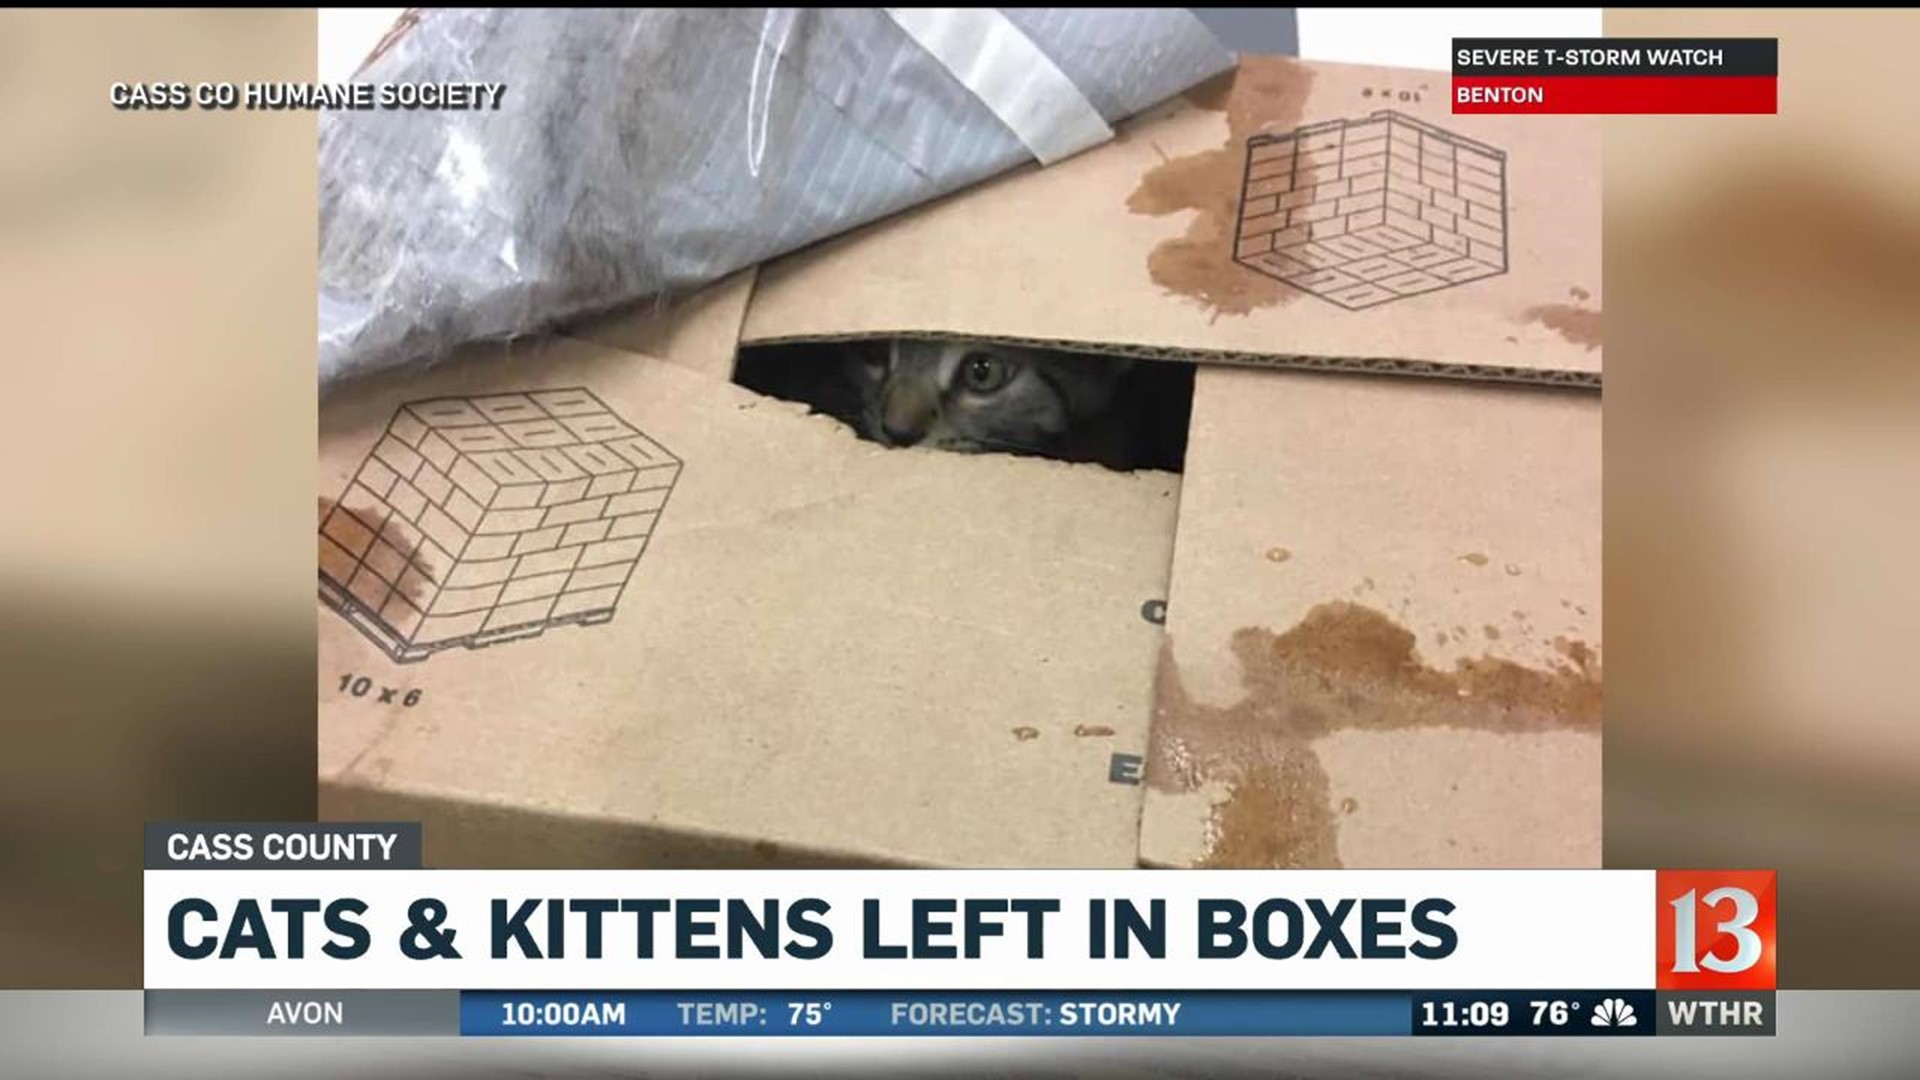 Cats and Kittens Left in Boxes